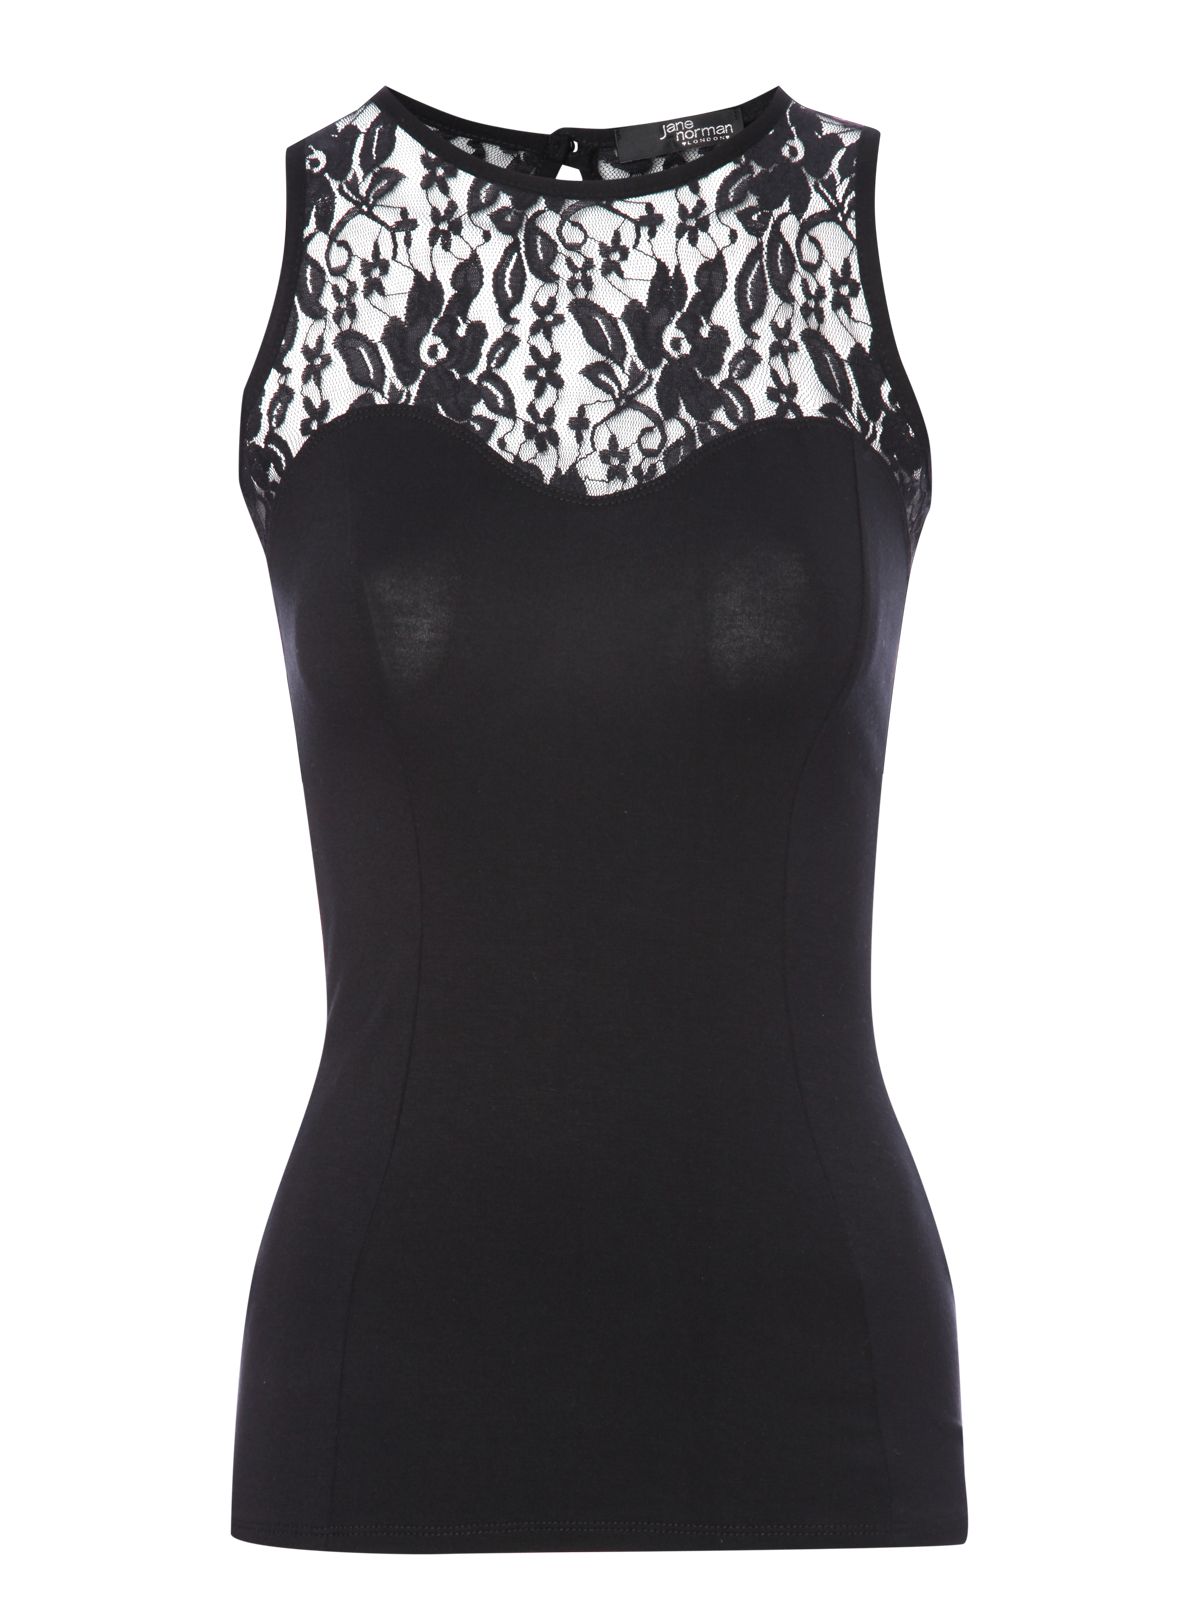 Jane Norman Sleeveless Lace Top in Black | Lyst